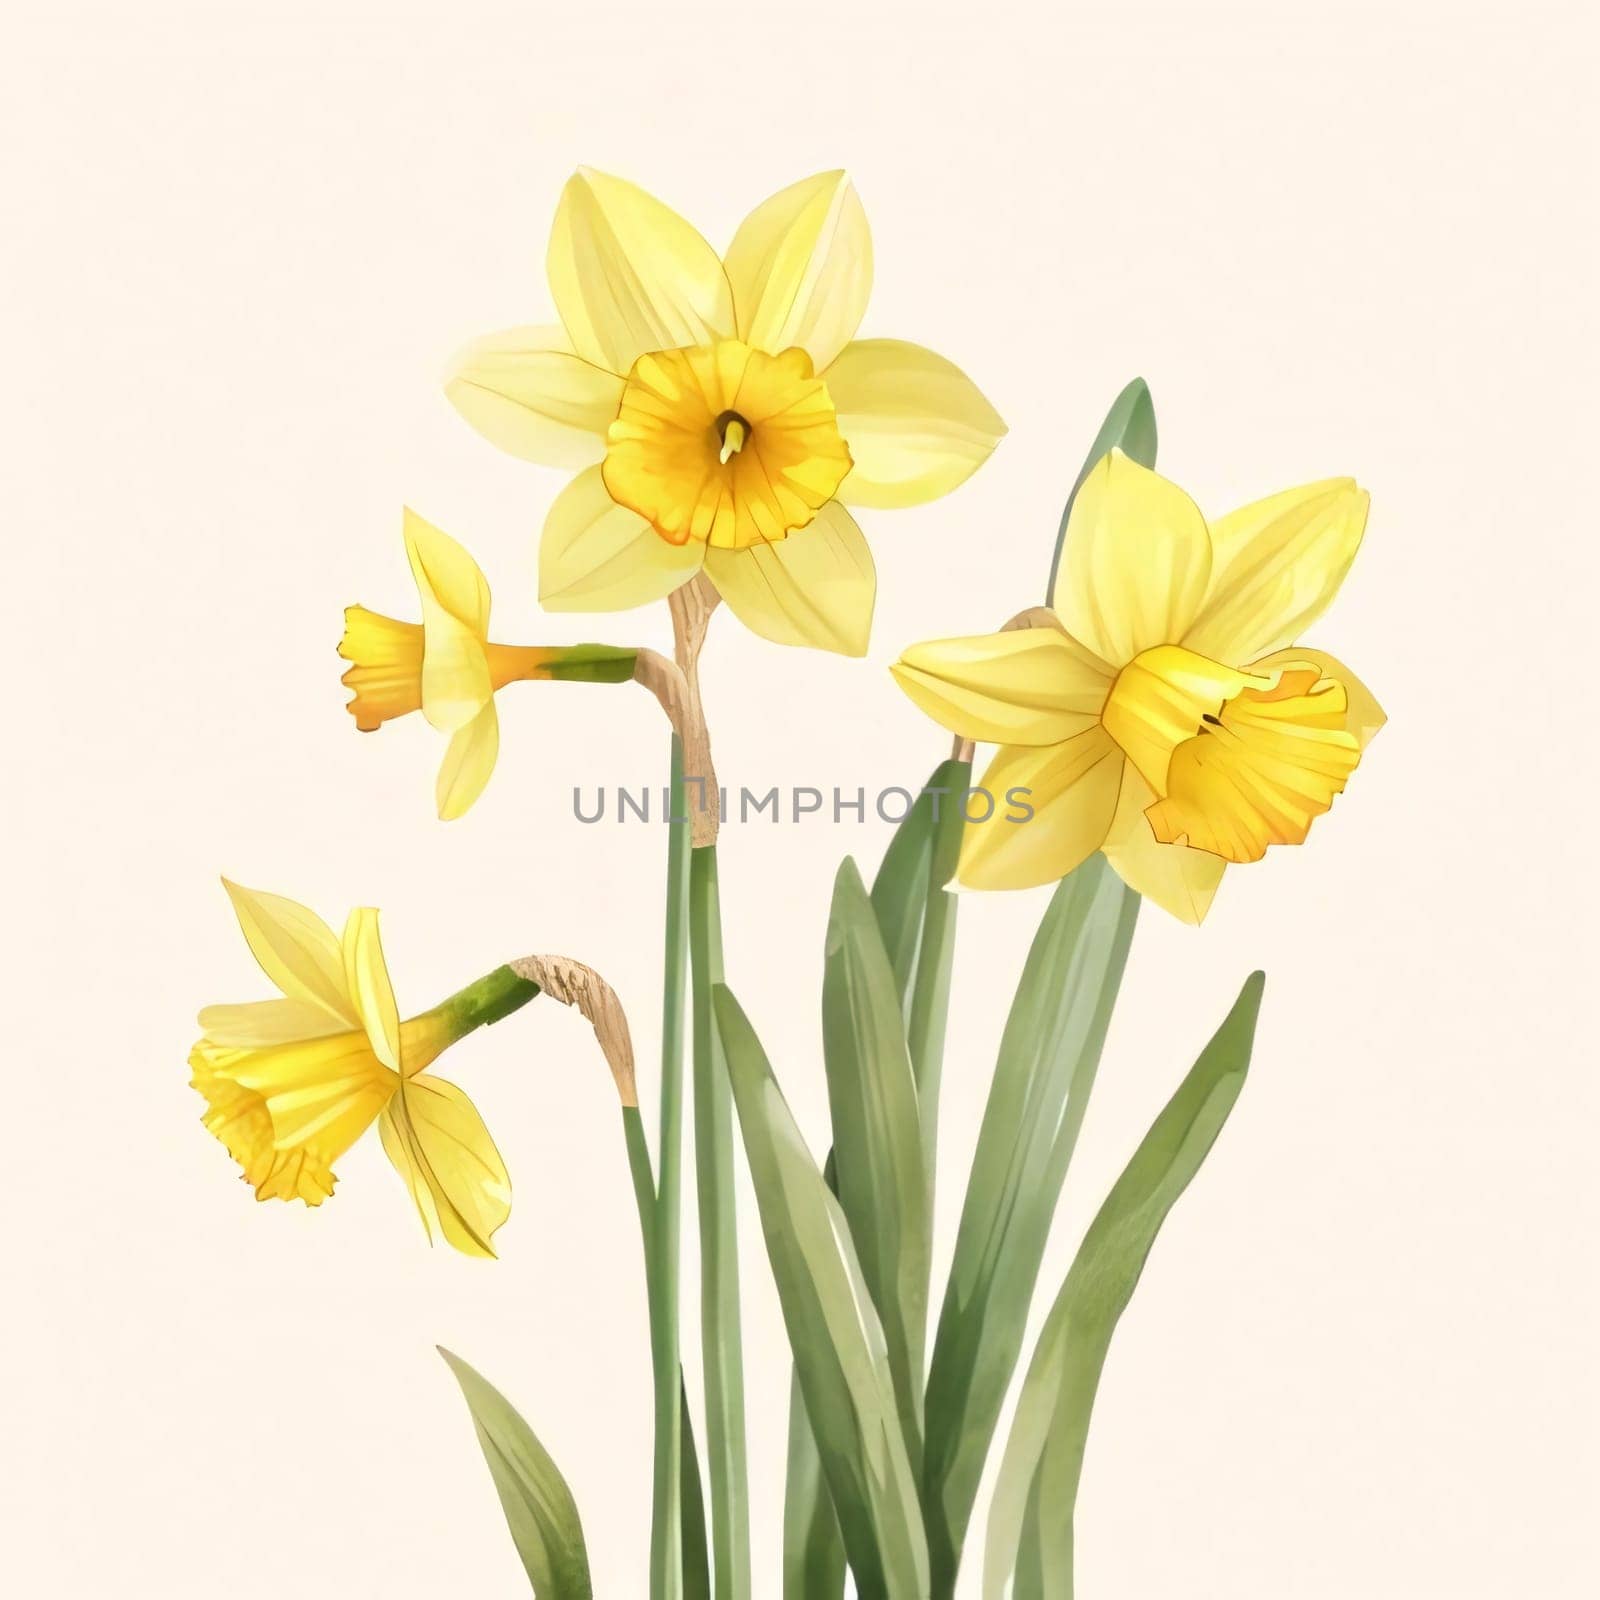 Drawn, painted flowers: yellow daffodils flowers with green stem and leaves. Flowering flowers, a symbol of spring, new life. by ThemesS